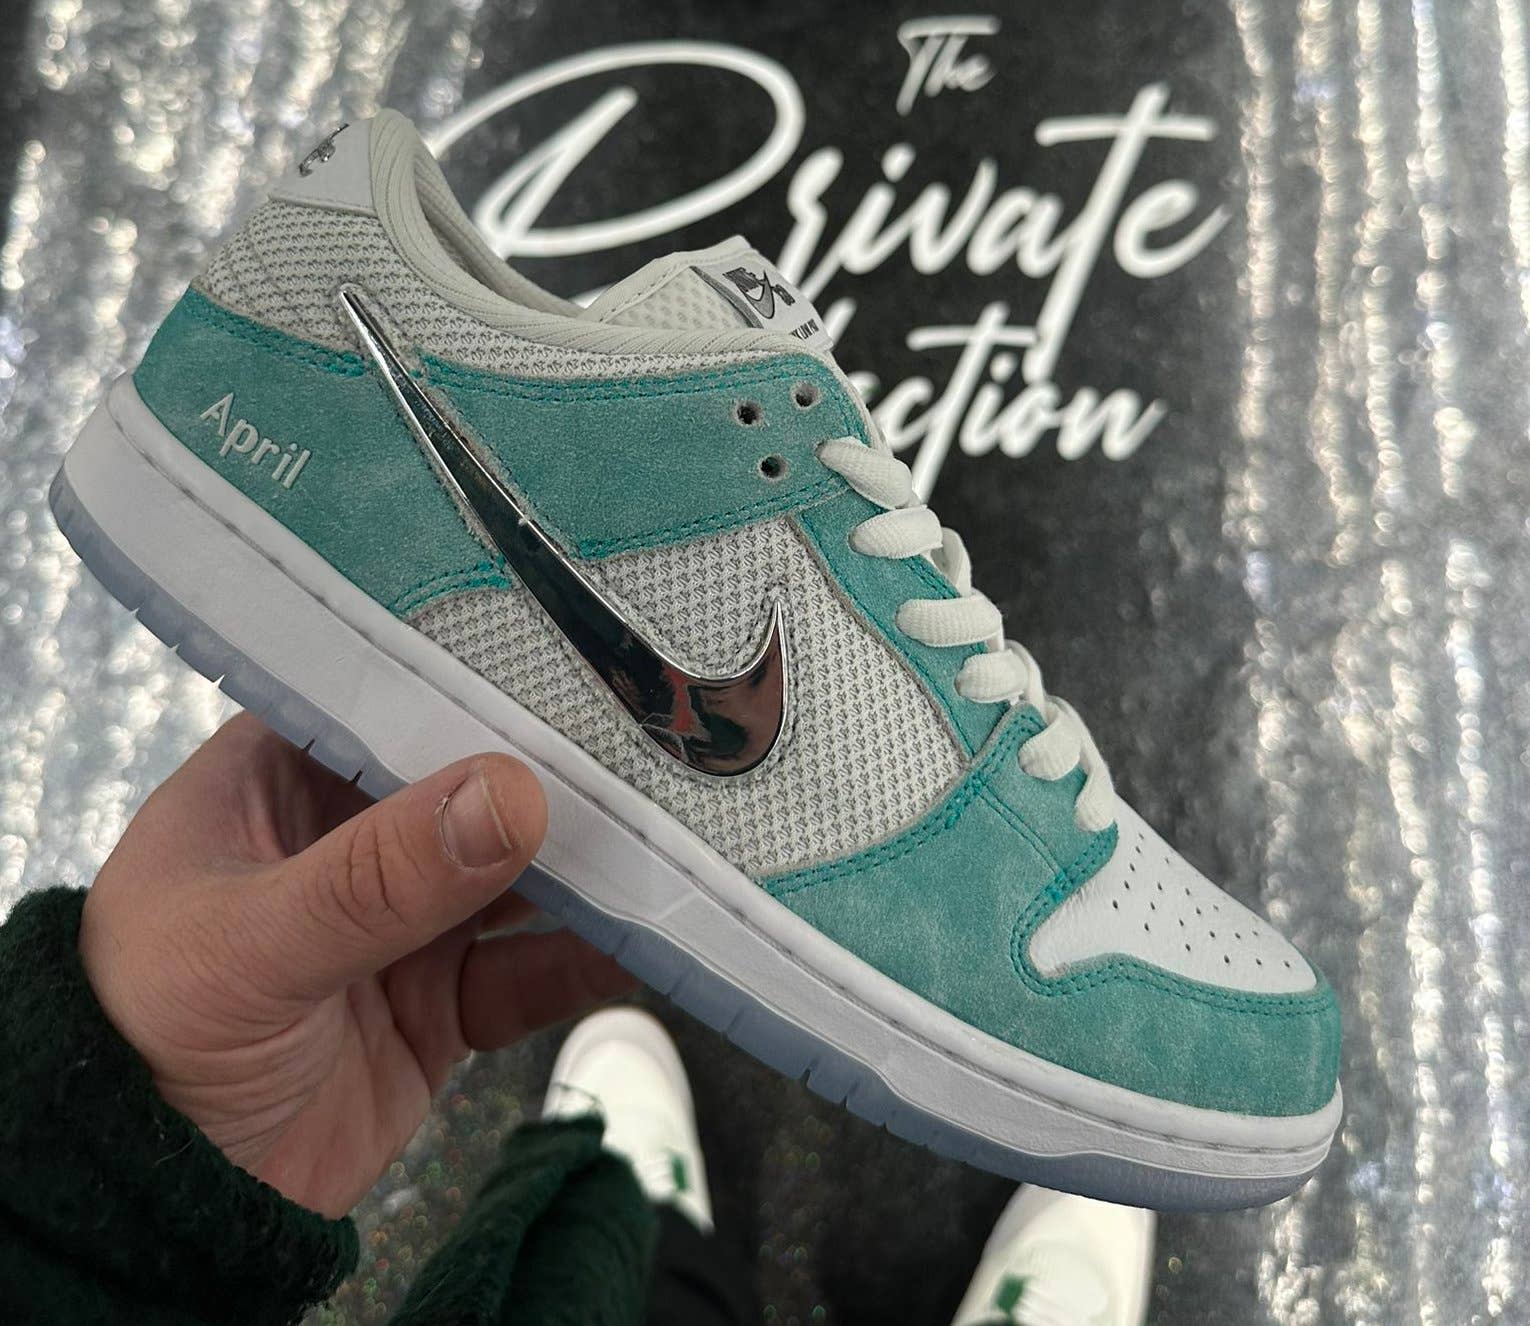 Pijler voormalig helemaal First Look at the April Skateboards x Nike SB Dunk Collab | Complex